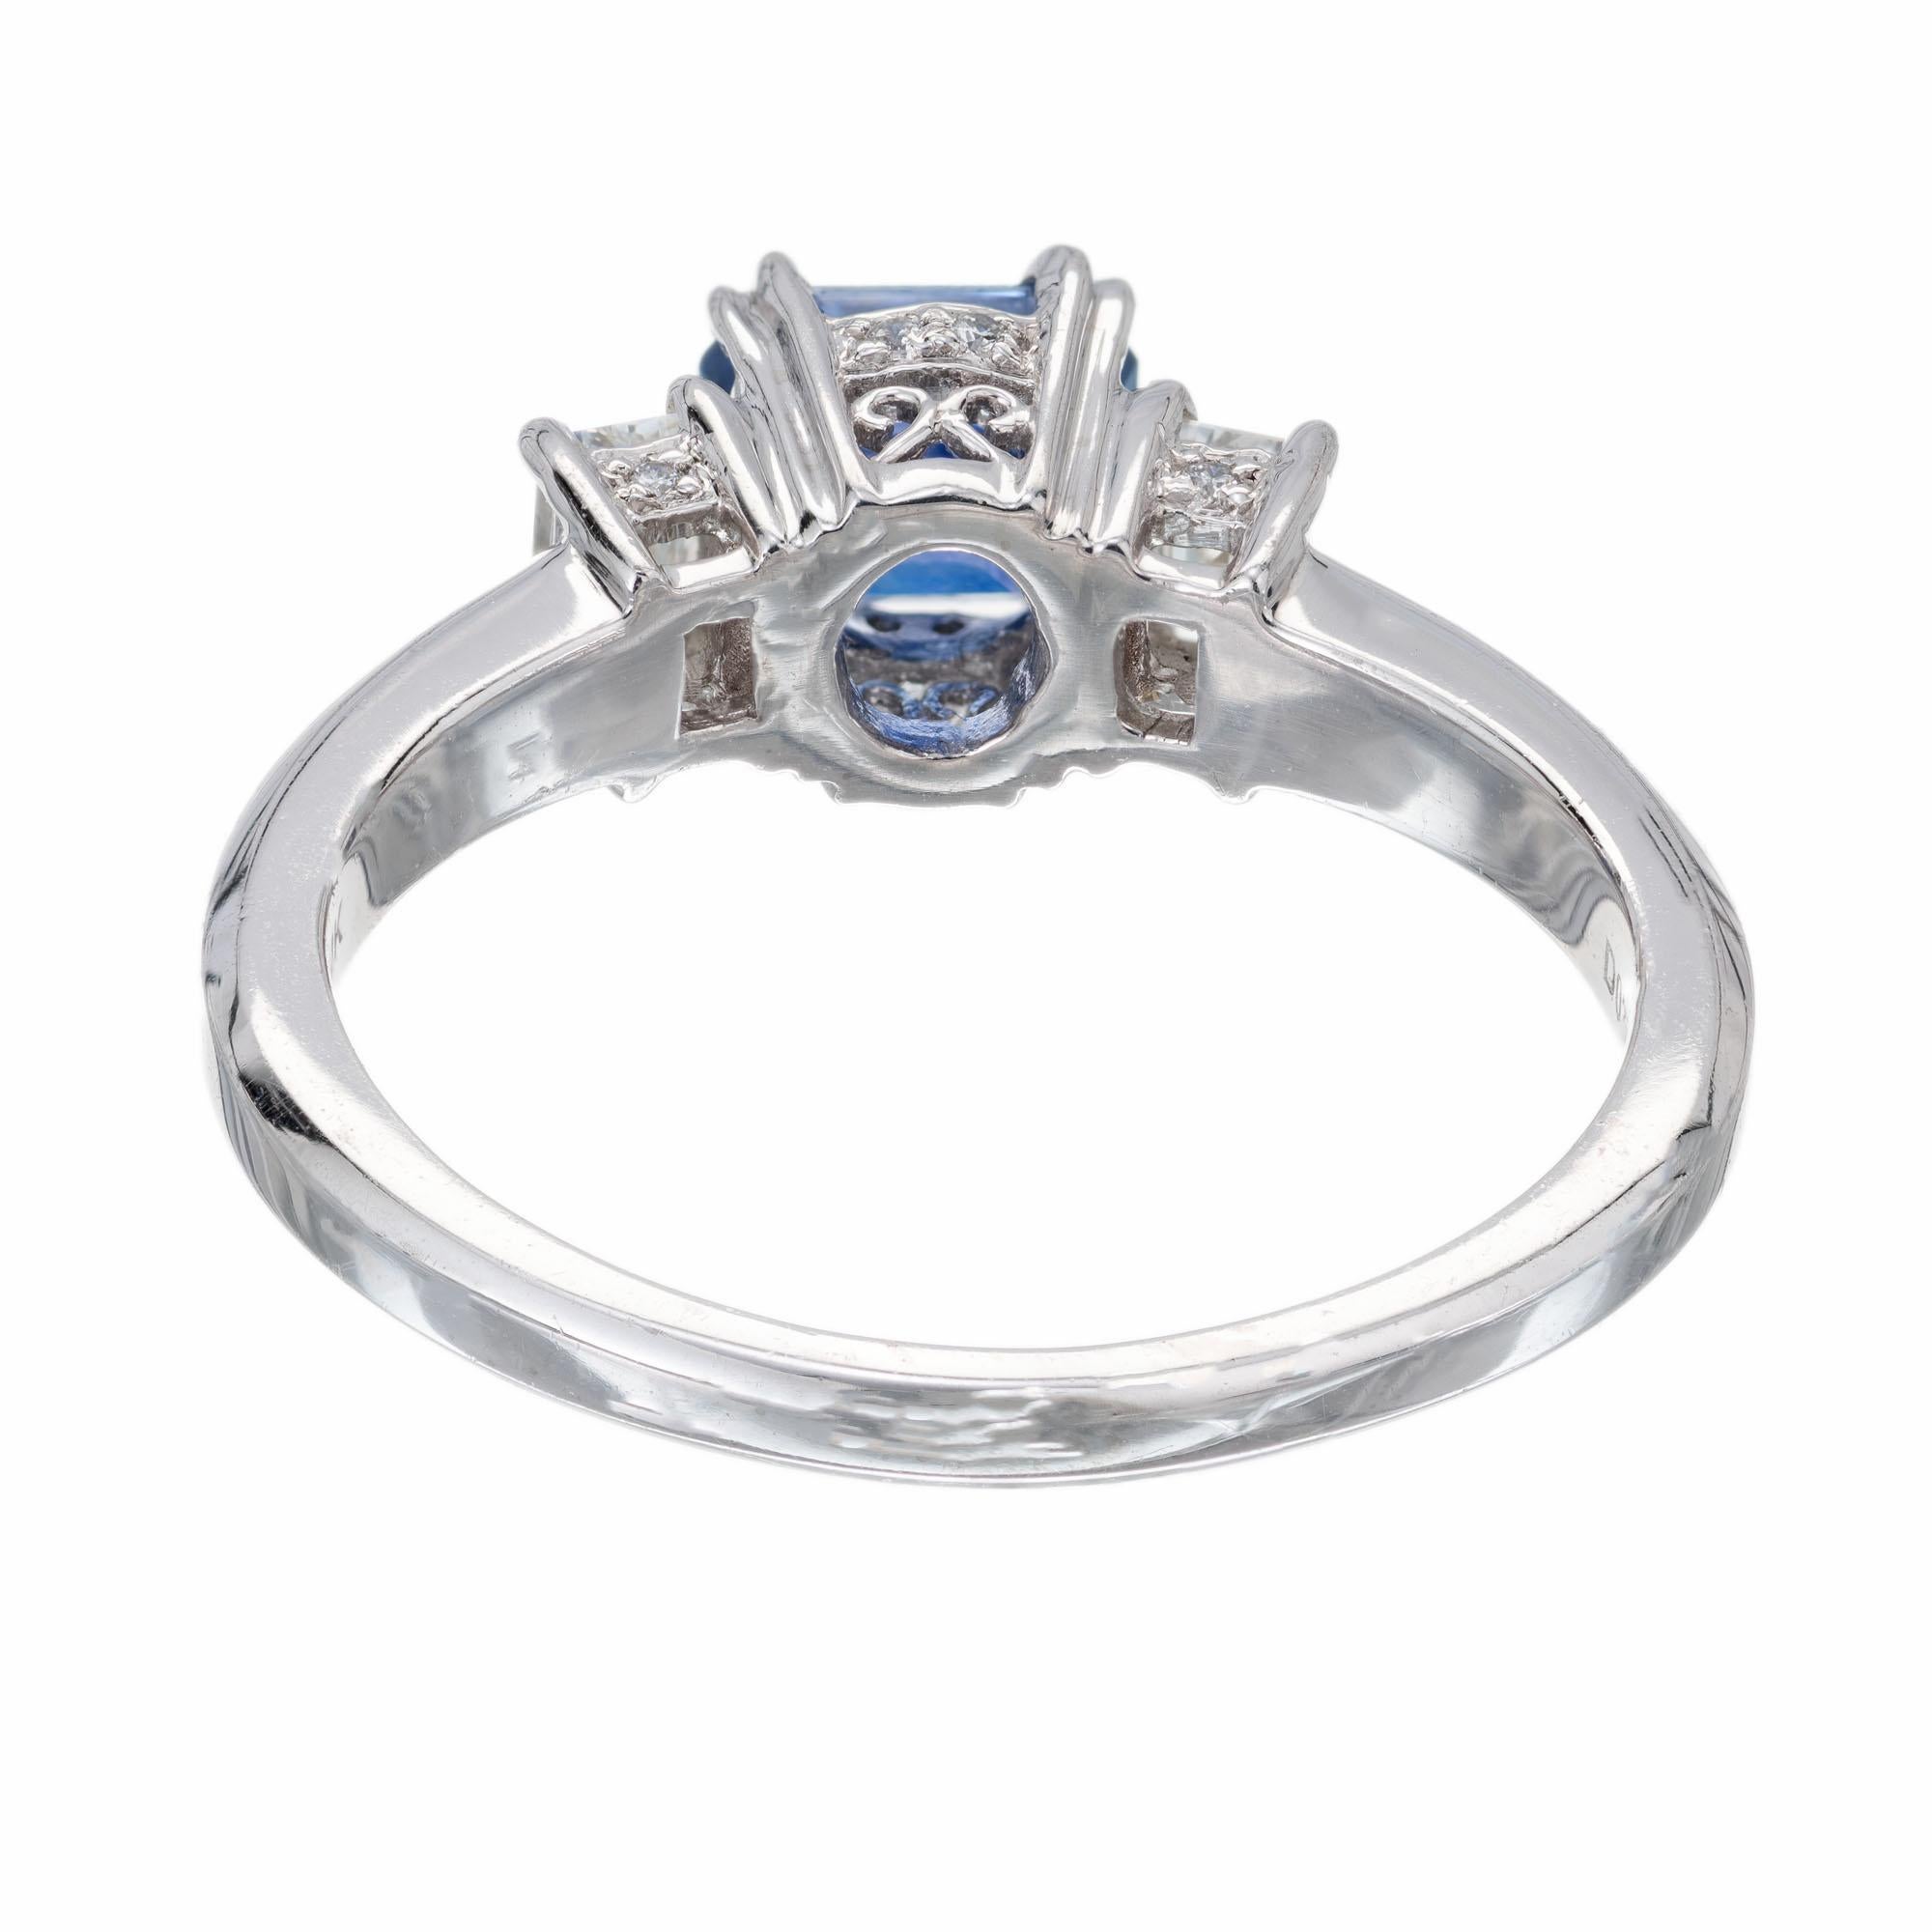 Peter Suchy AGL Certified 1.29 Carat Sapphire Diamond Platinum Engagement Ring In New Condition For Sale In Stamford, CT